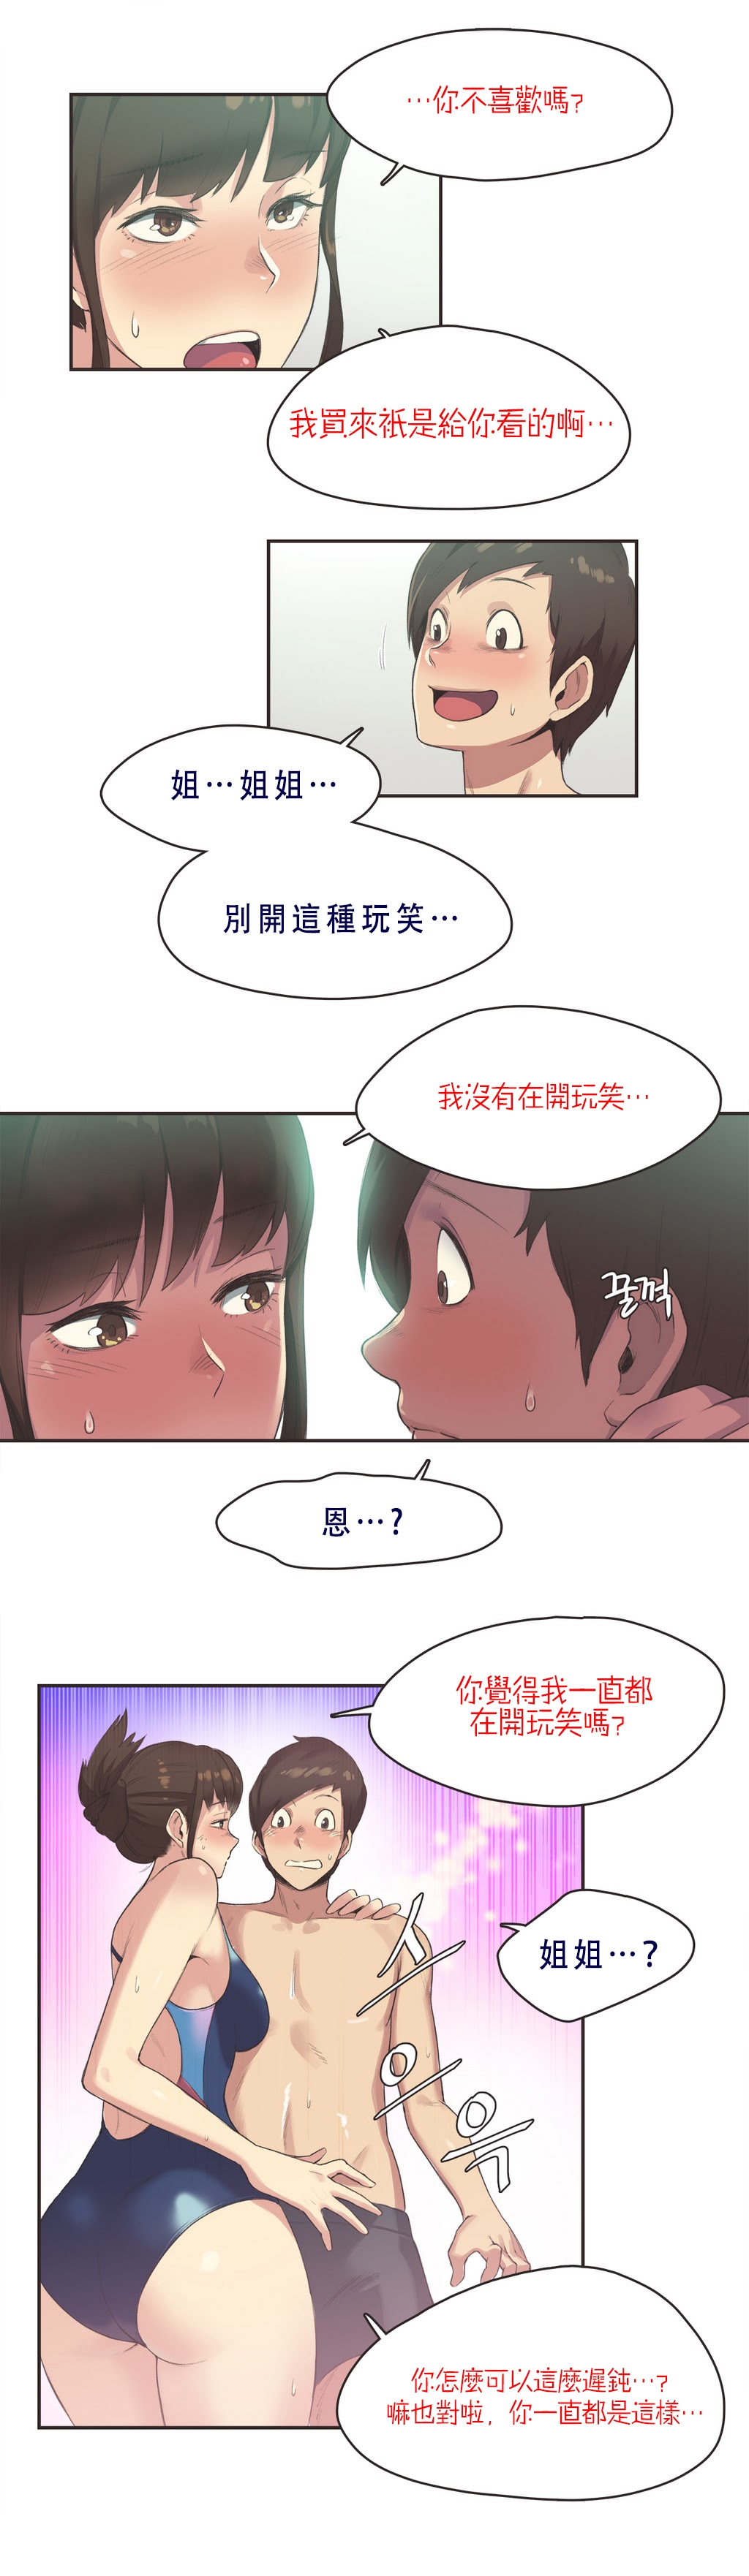 [Gamang] Sports Girl Ch.7 [Chinese] [高麗個人漢化] 3